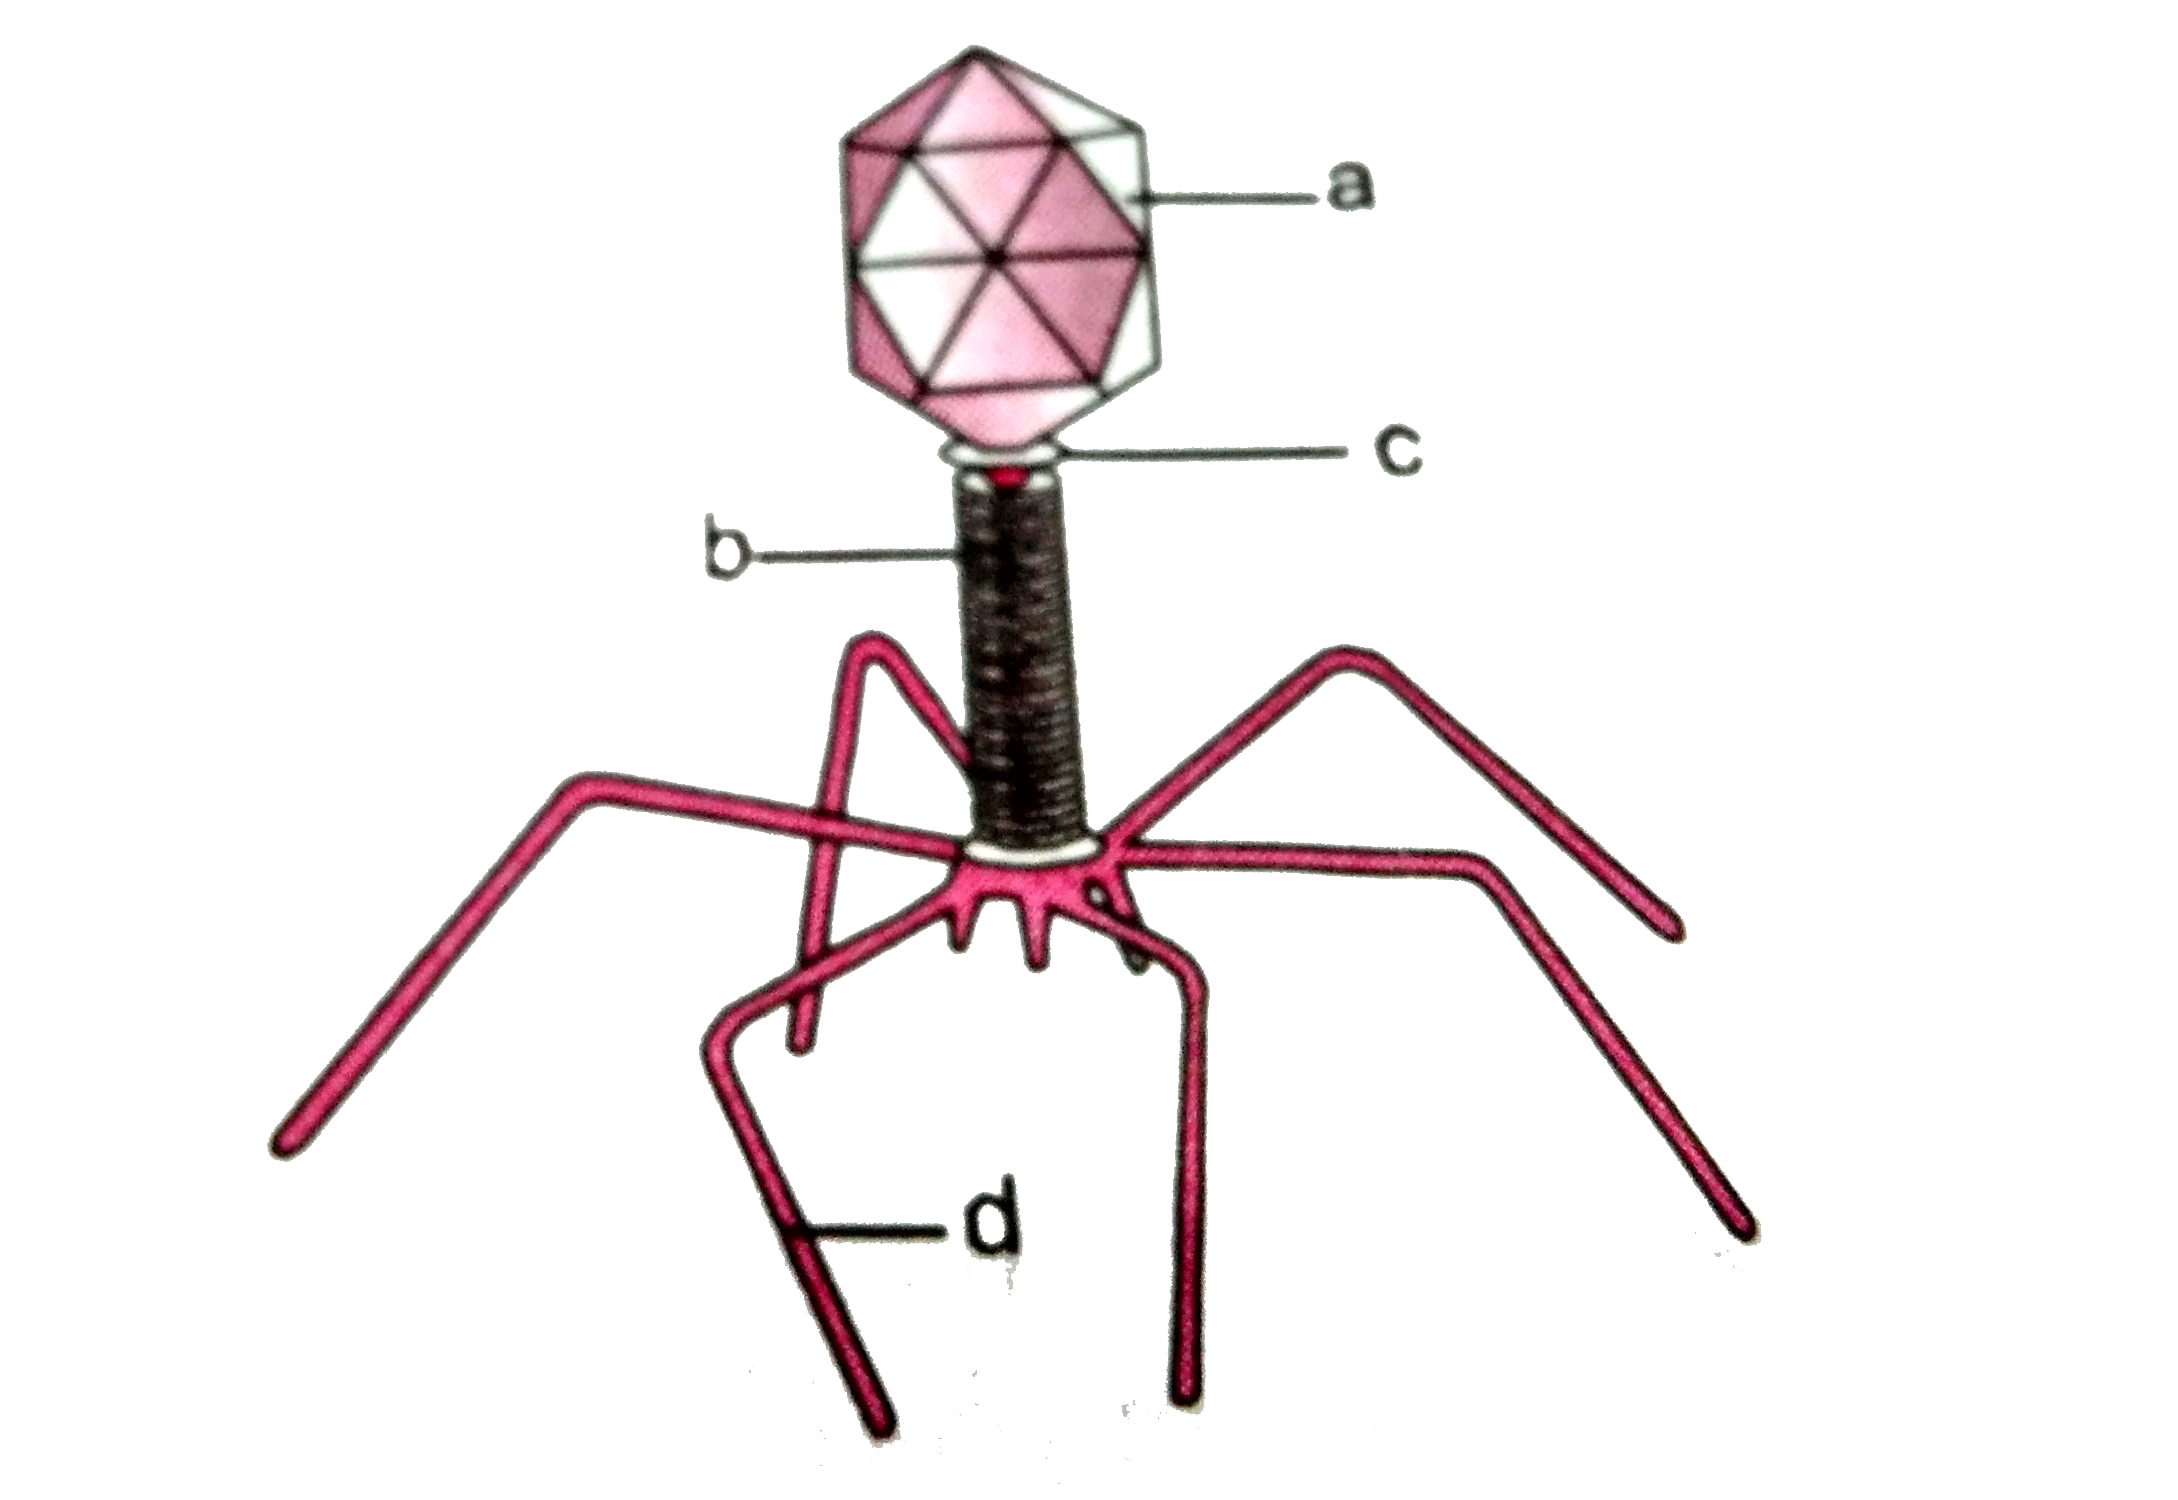 Given is a diagram of a bacteriophage in which one of the options all the four parts, a, b, c, and d are correct.